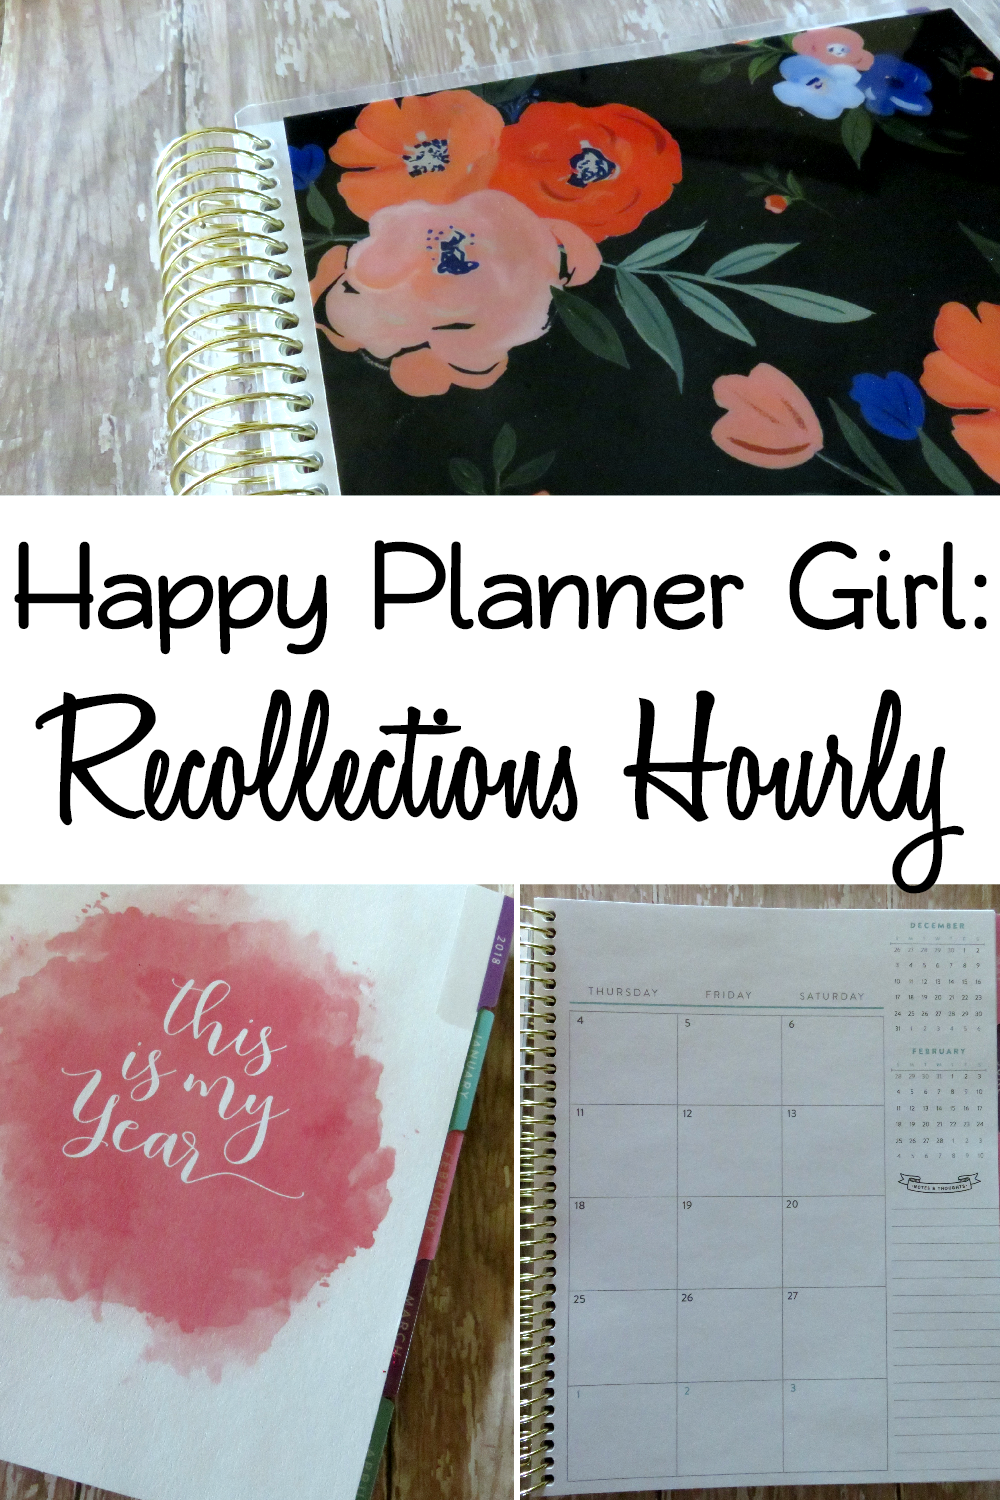 Review of Recollections Hourly Planner